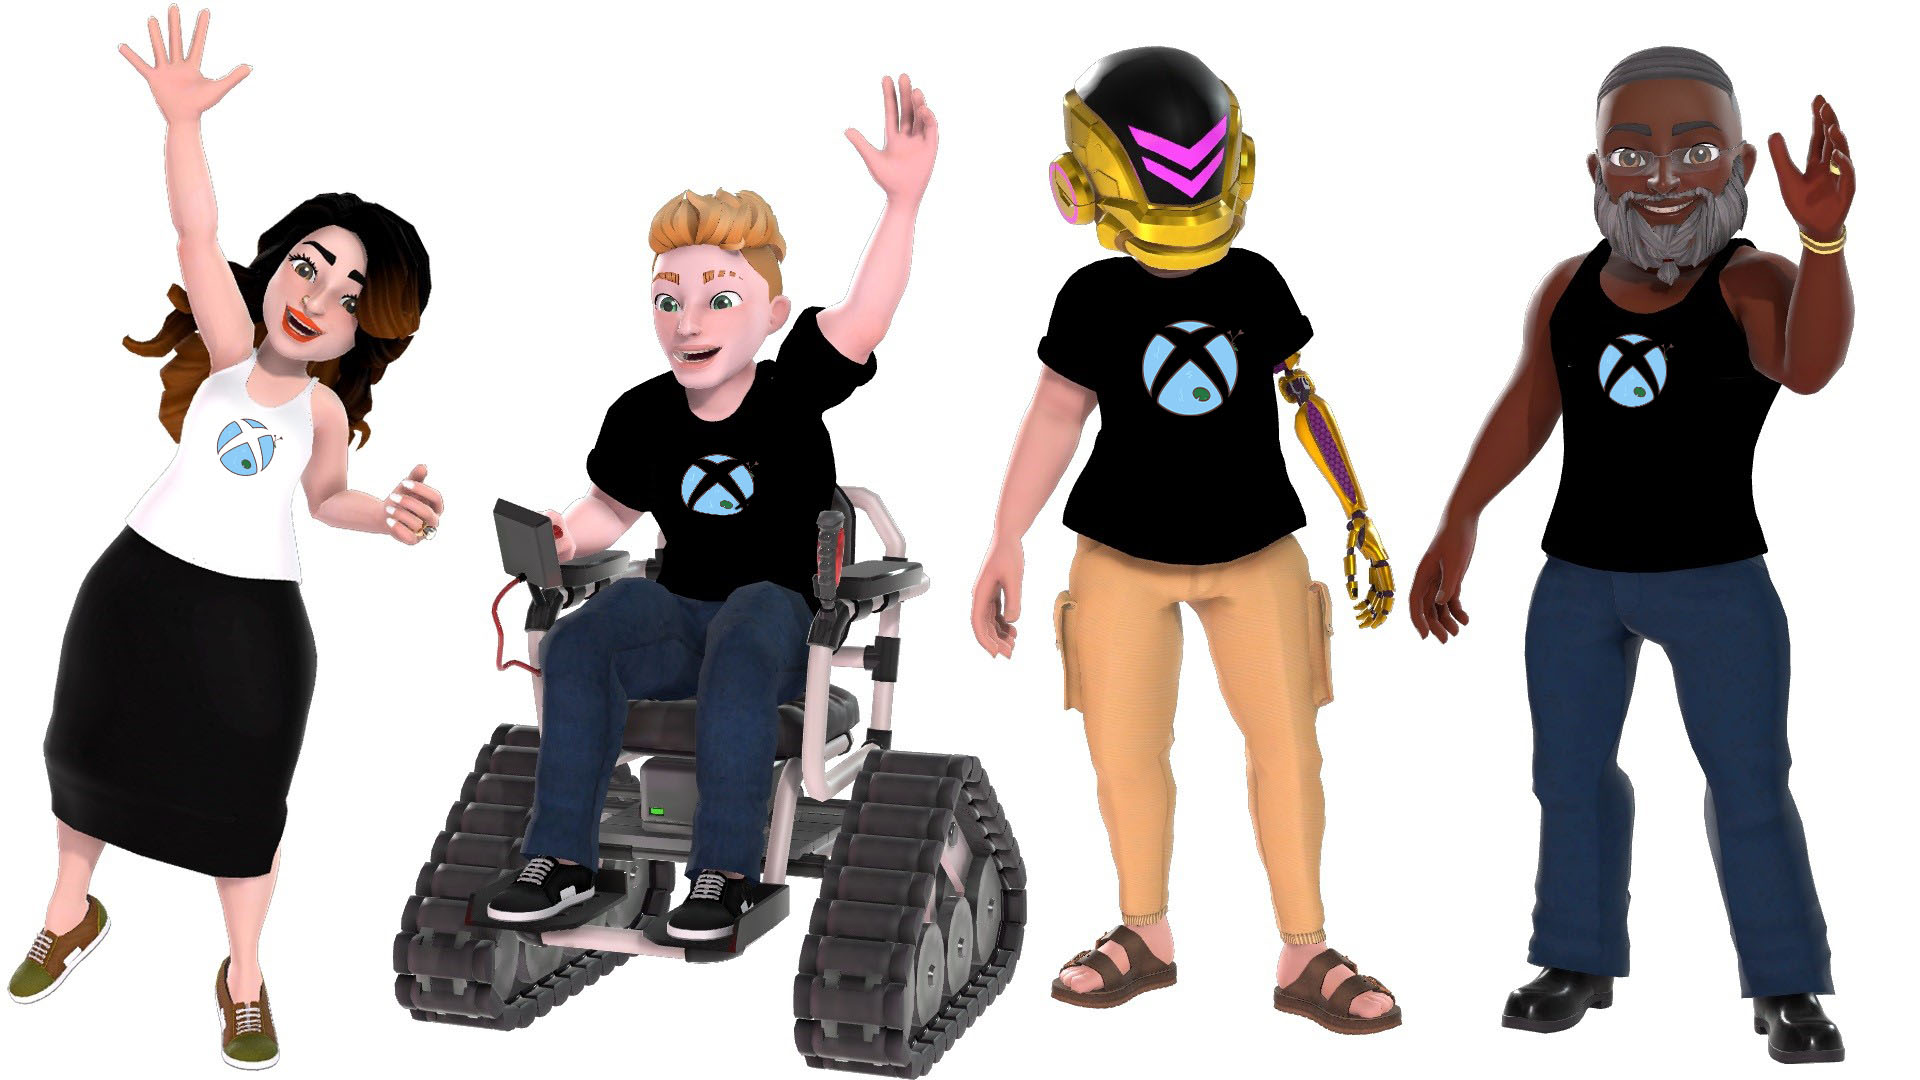 Four diverse avatar characters wearing shirts and tank tops featuring the cartoon stylized Xbox sphere with a blue pond background and green lily pad in honor or mental wellness.